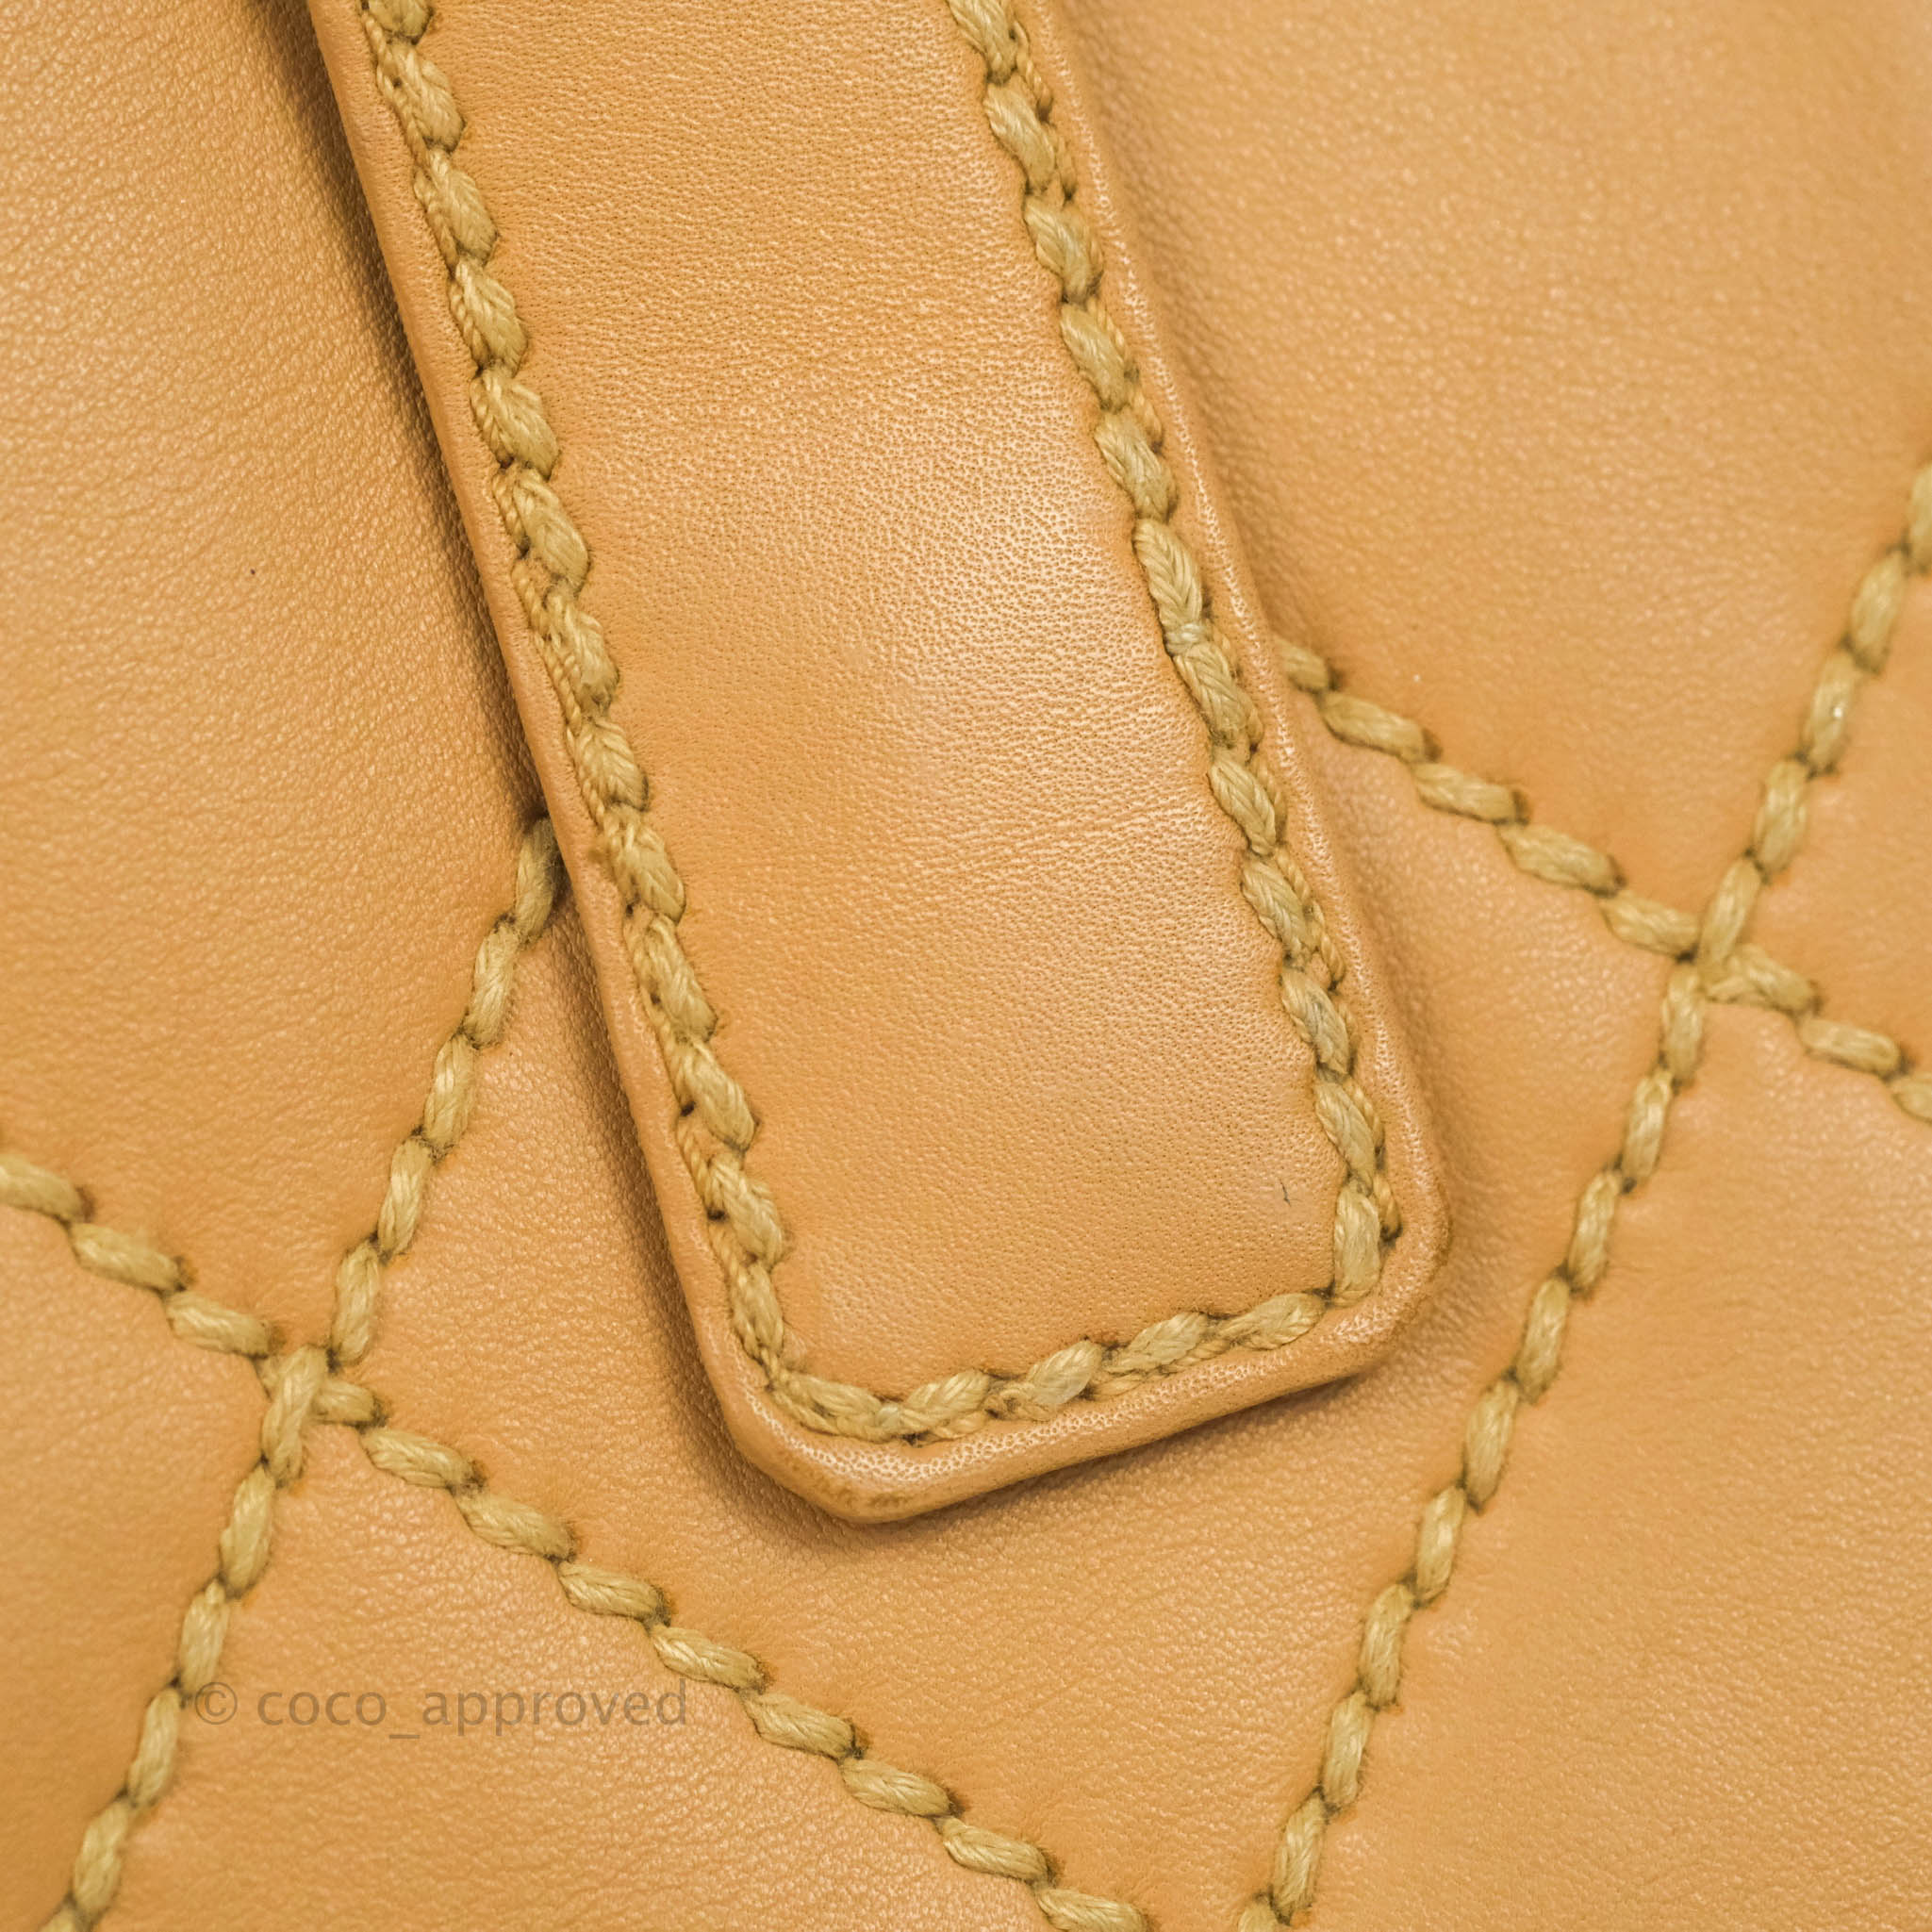 Sold at Auction: AUTHENTIC CHANEL WILD STITCH QUILTED PURSE